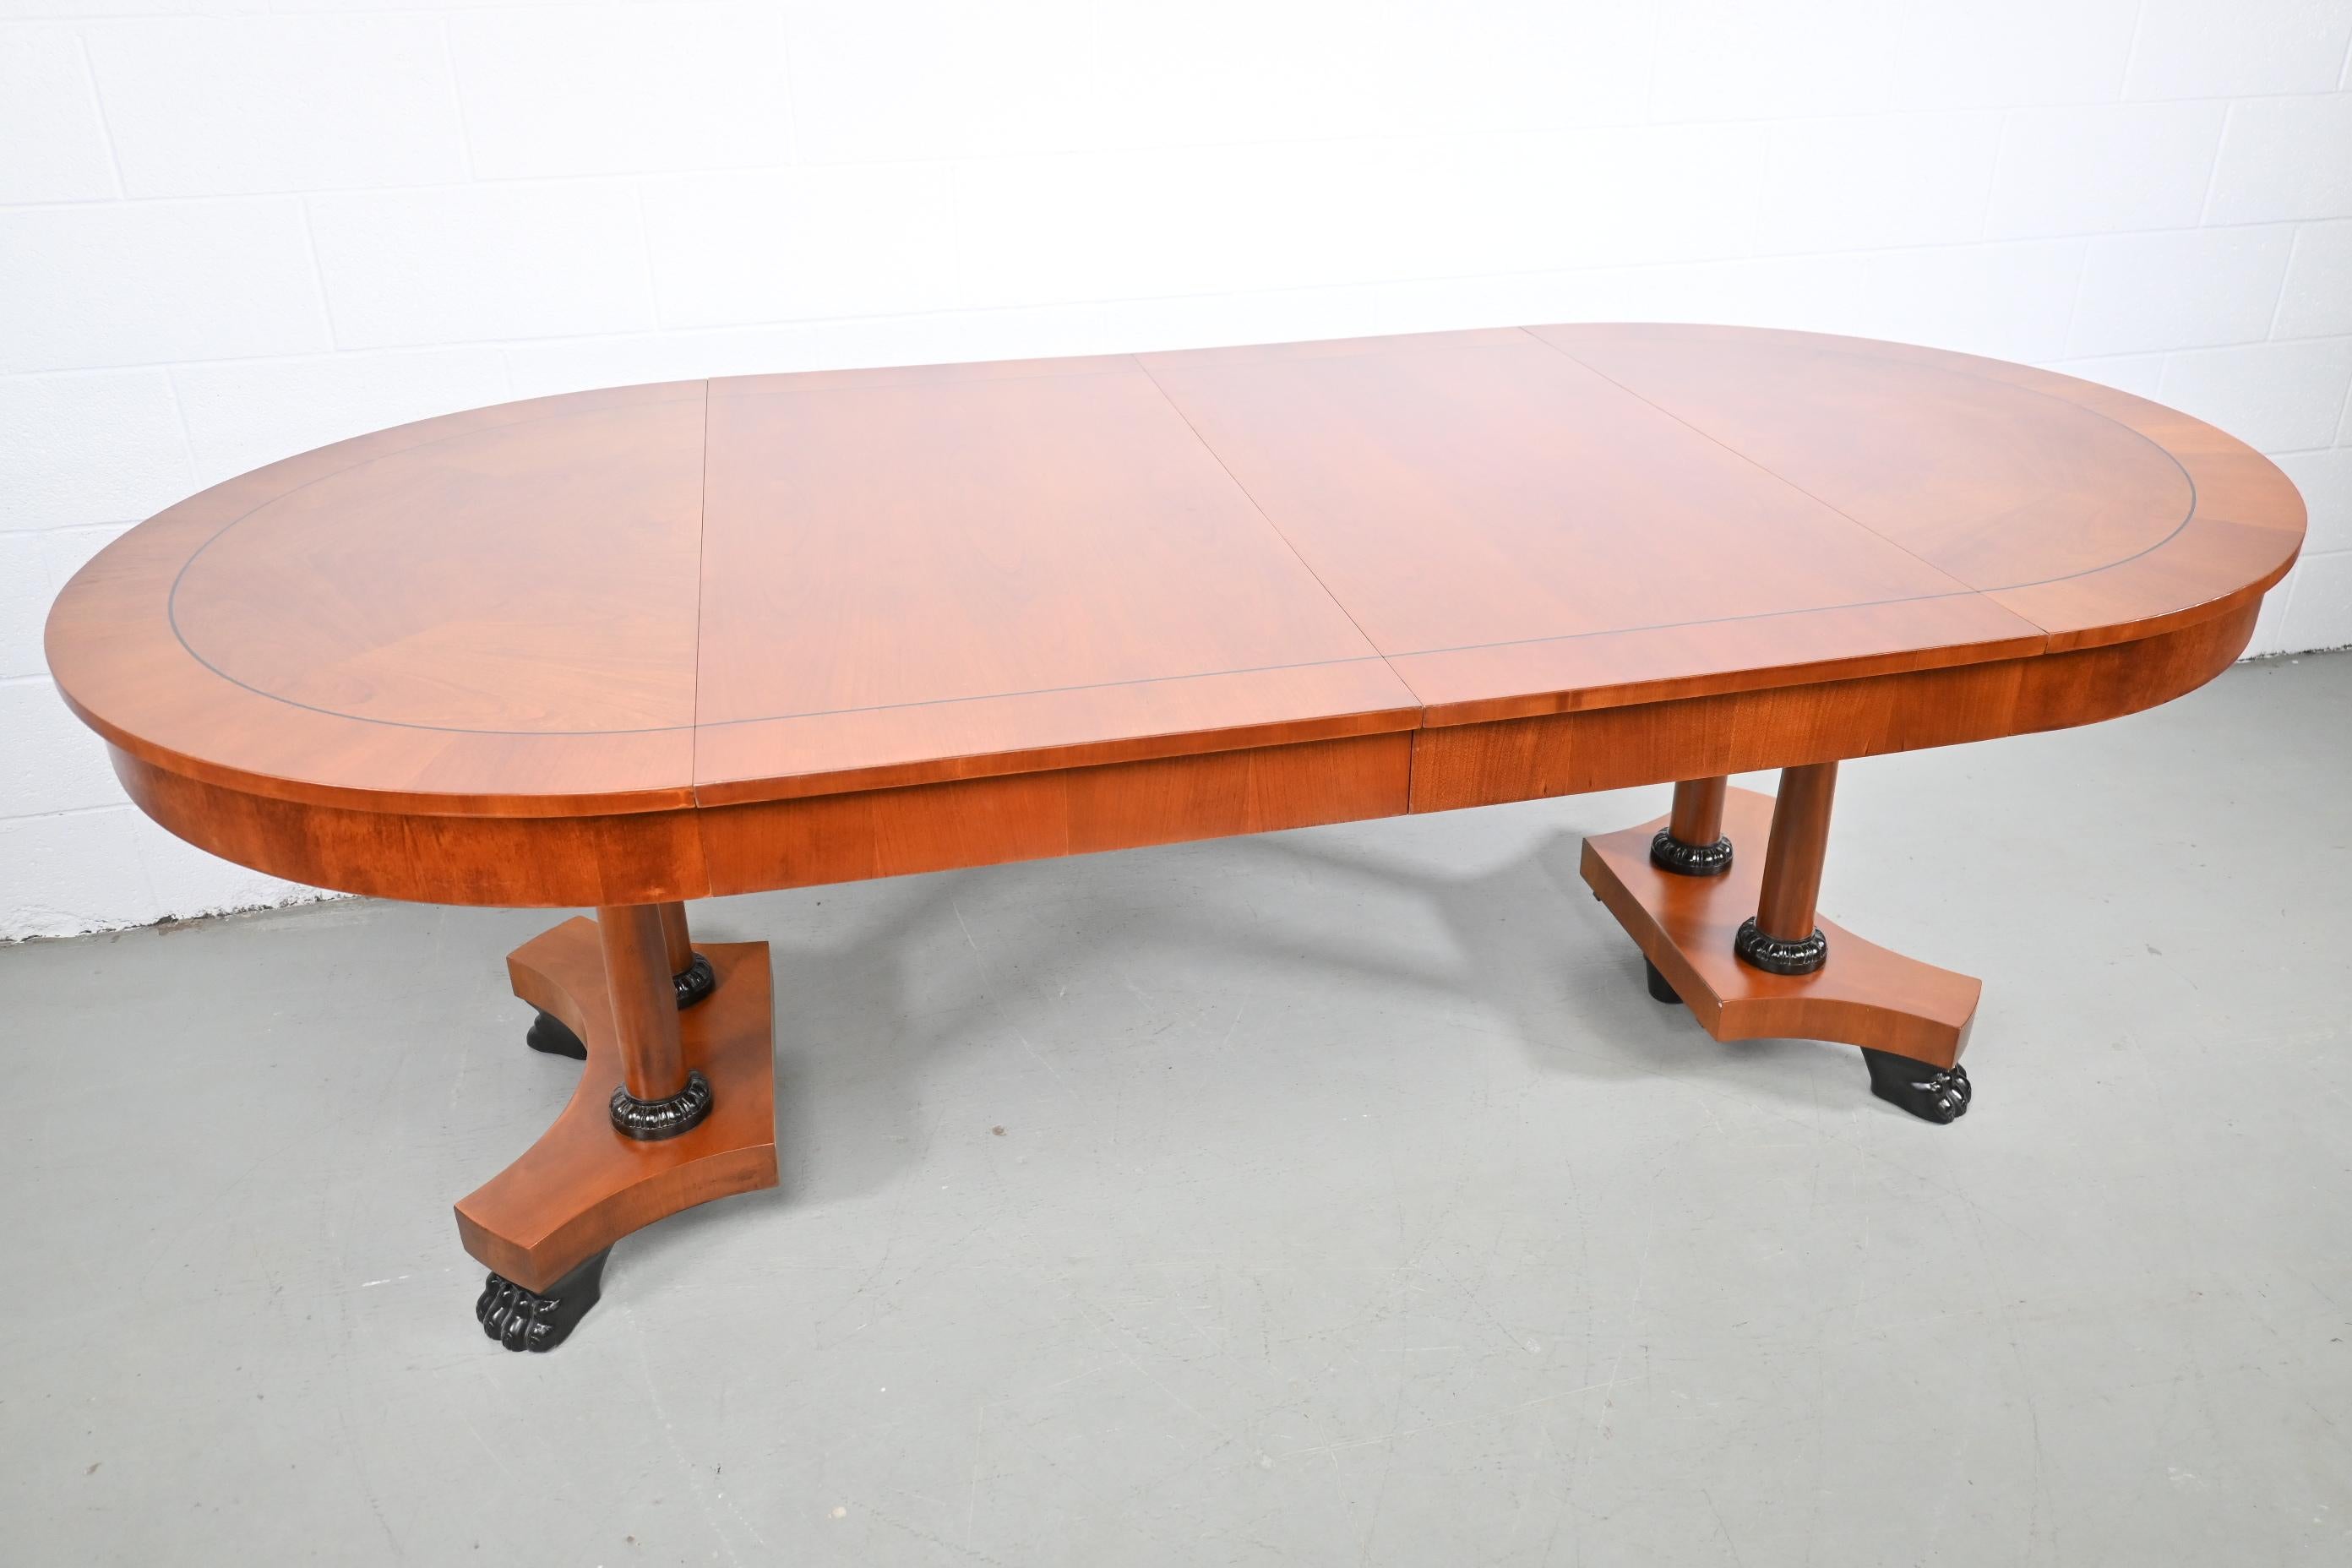 Baker Furniture Palladian Round Extension Dining Table

Baker Furniture, USA, 1990s

Measures: 46 Wide x 46 Deep x 31 High. Extends up to 90